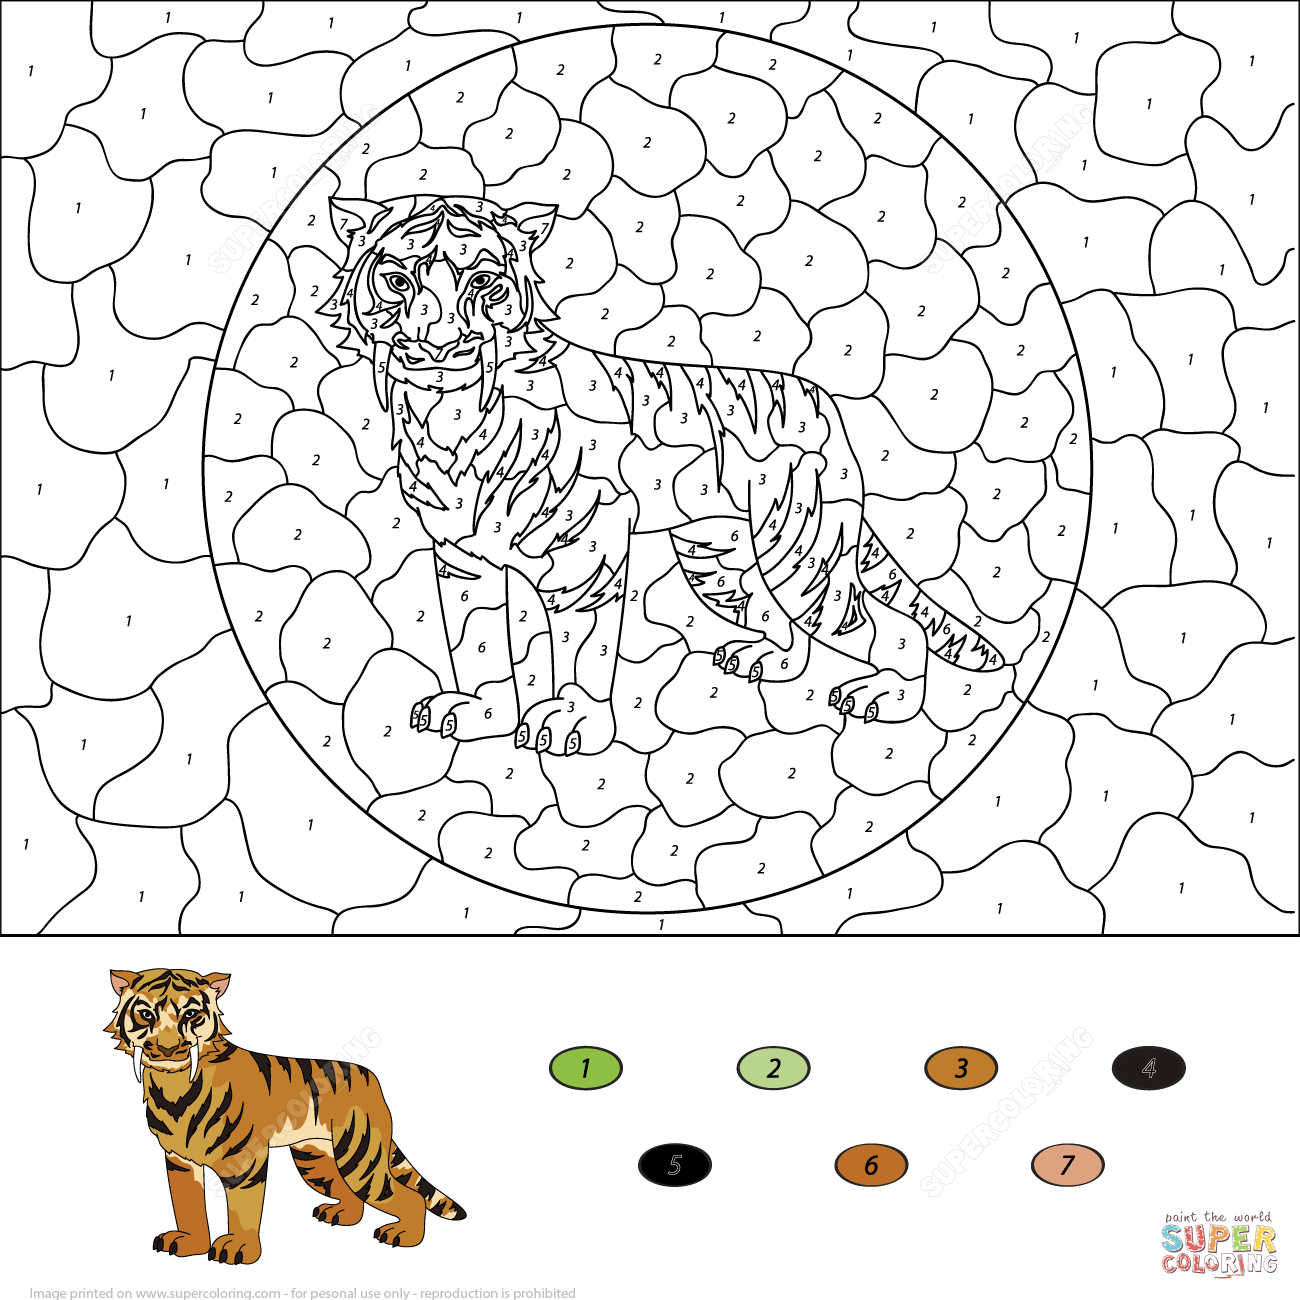 saber-toothed-tiger-color-by-number-coloring-page.png